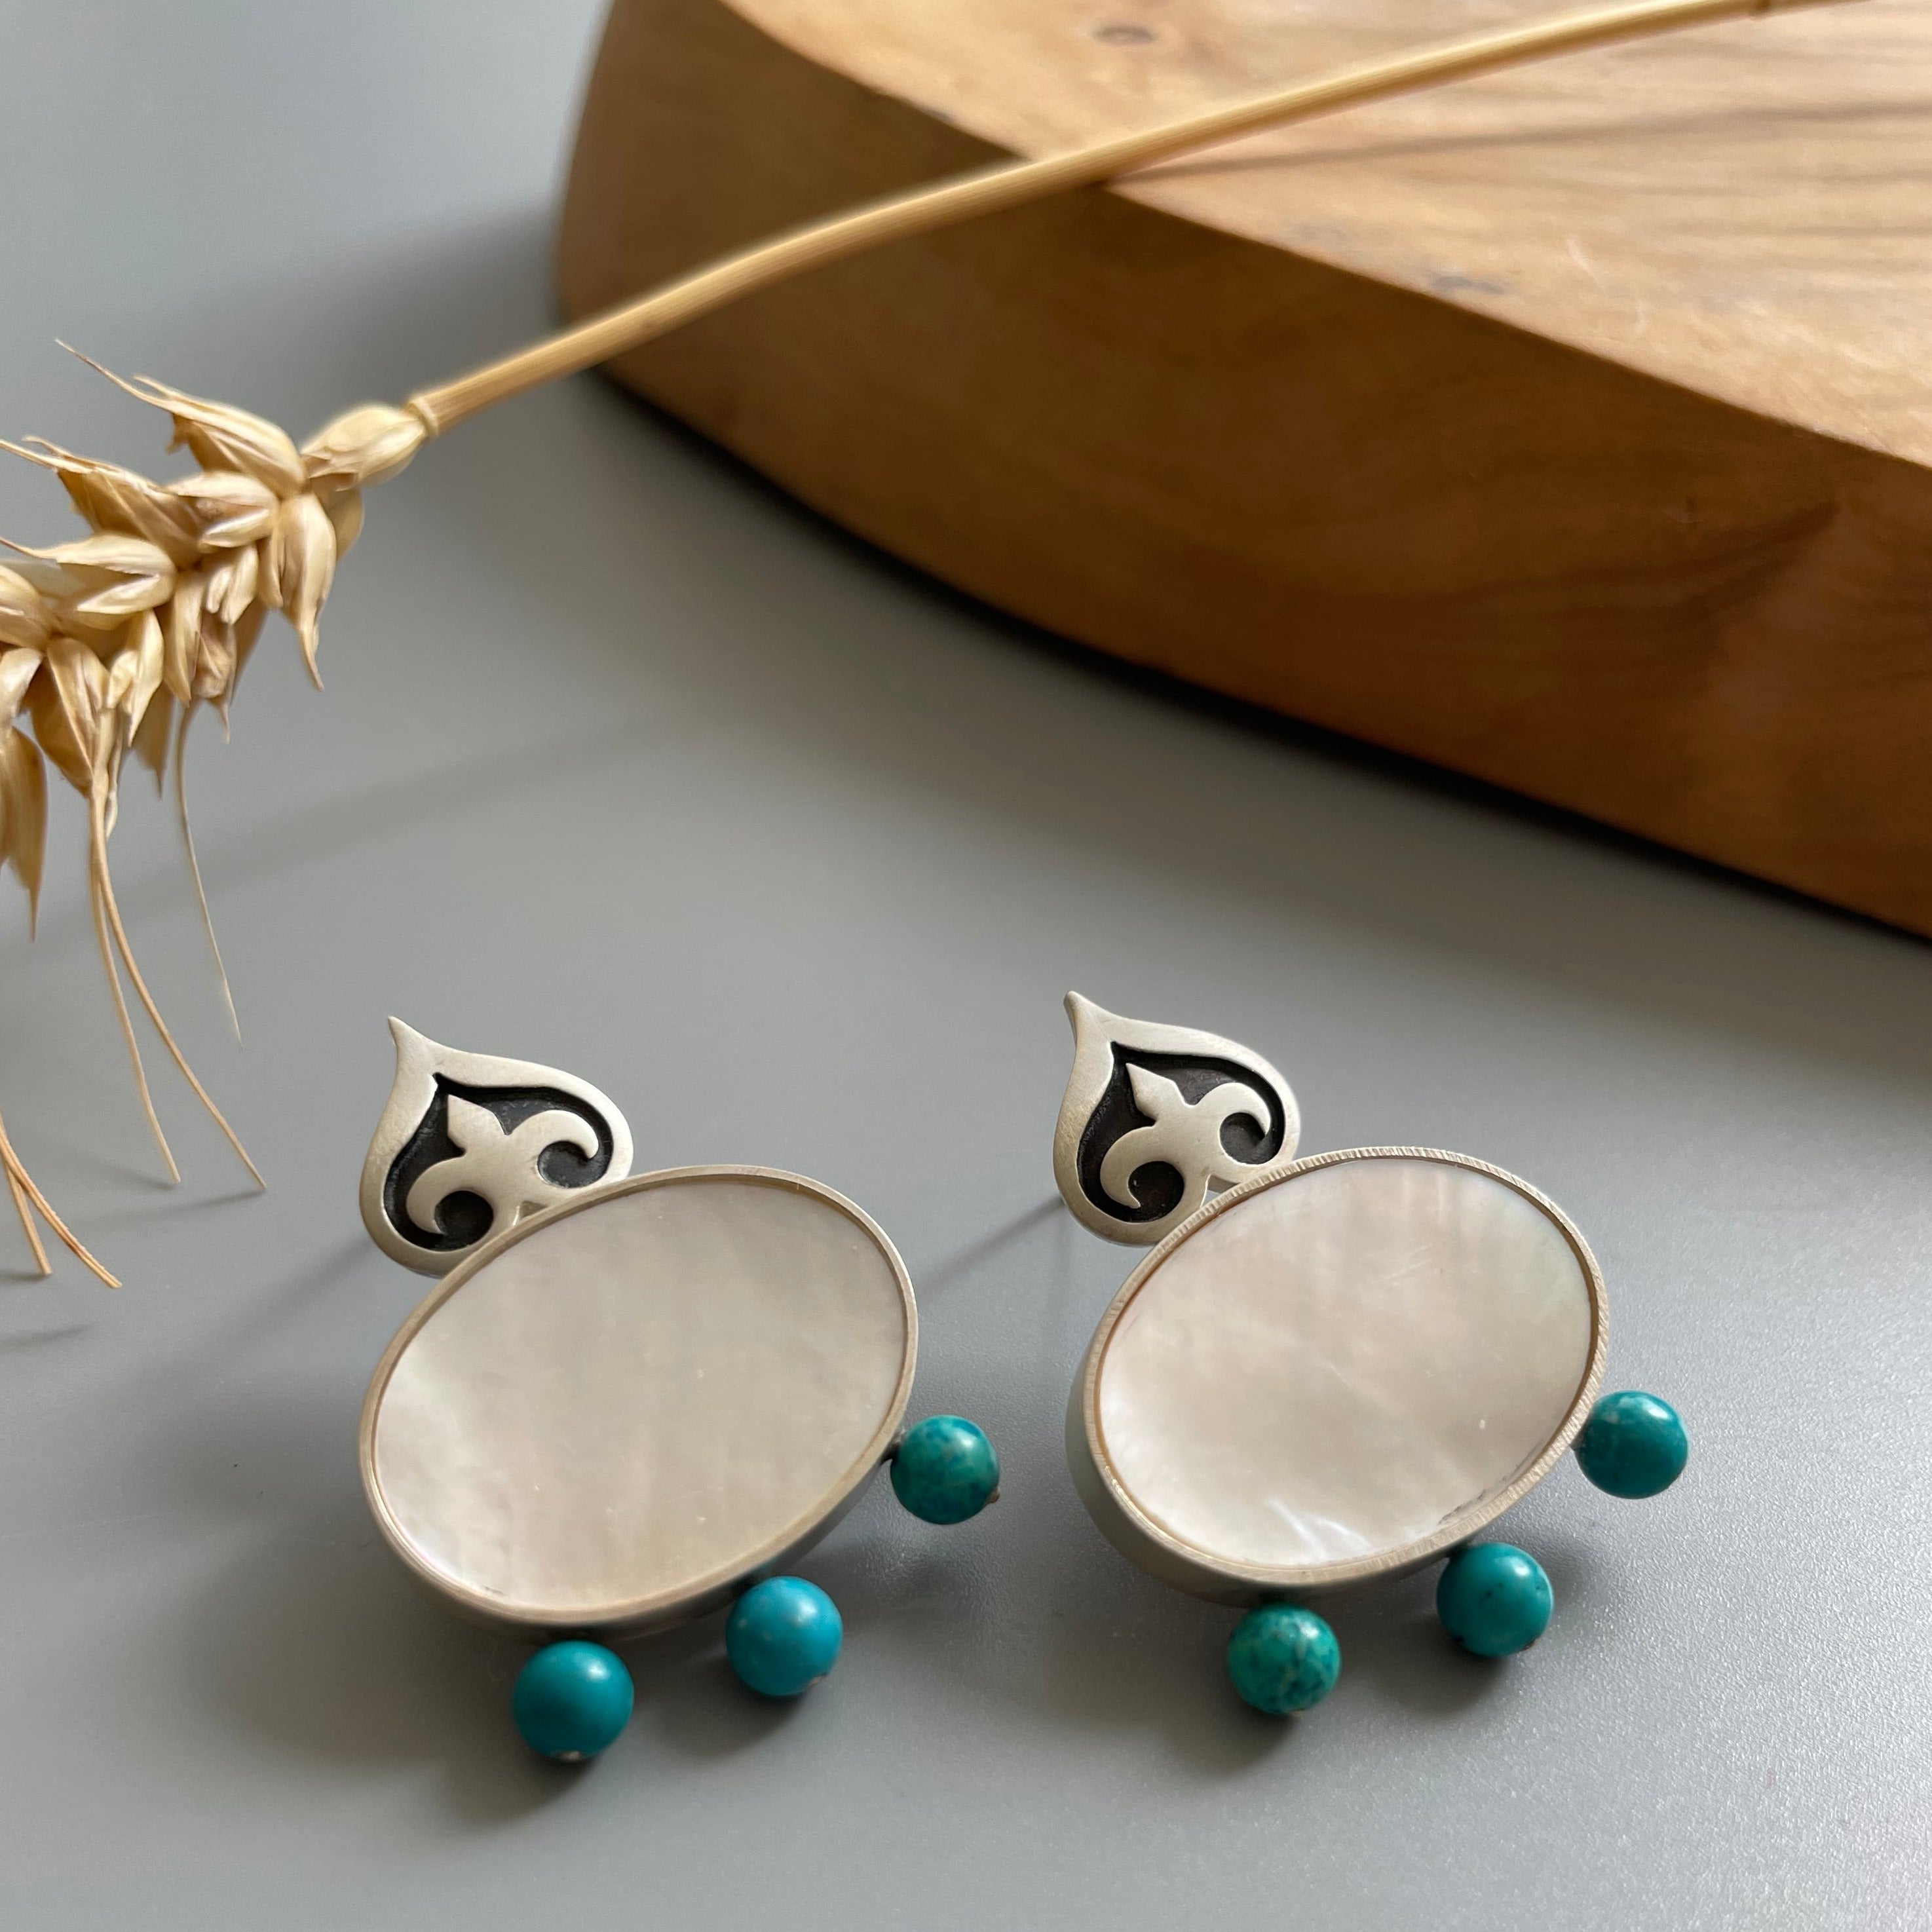 Handmade Earrings with Turquoise and Shell